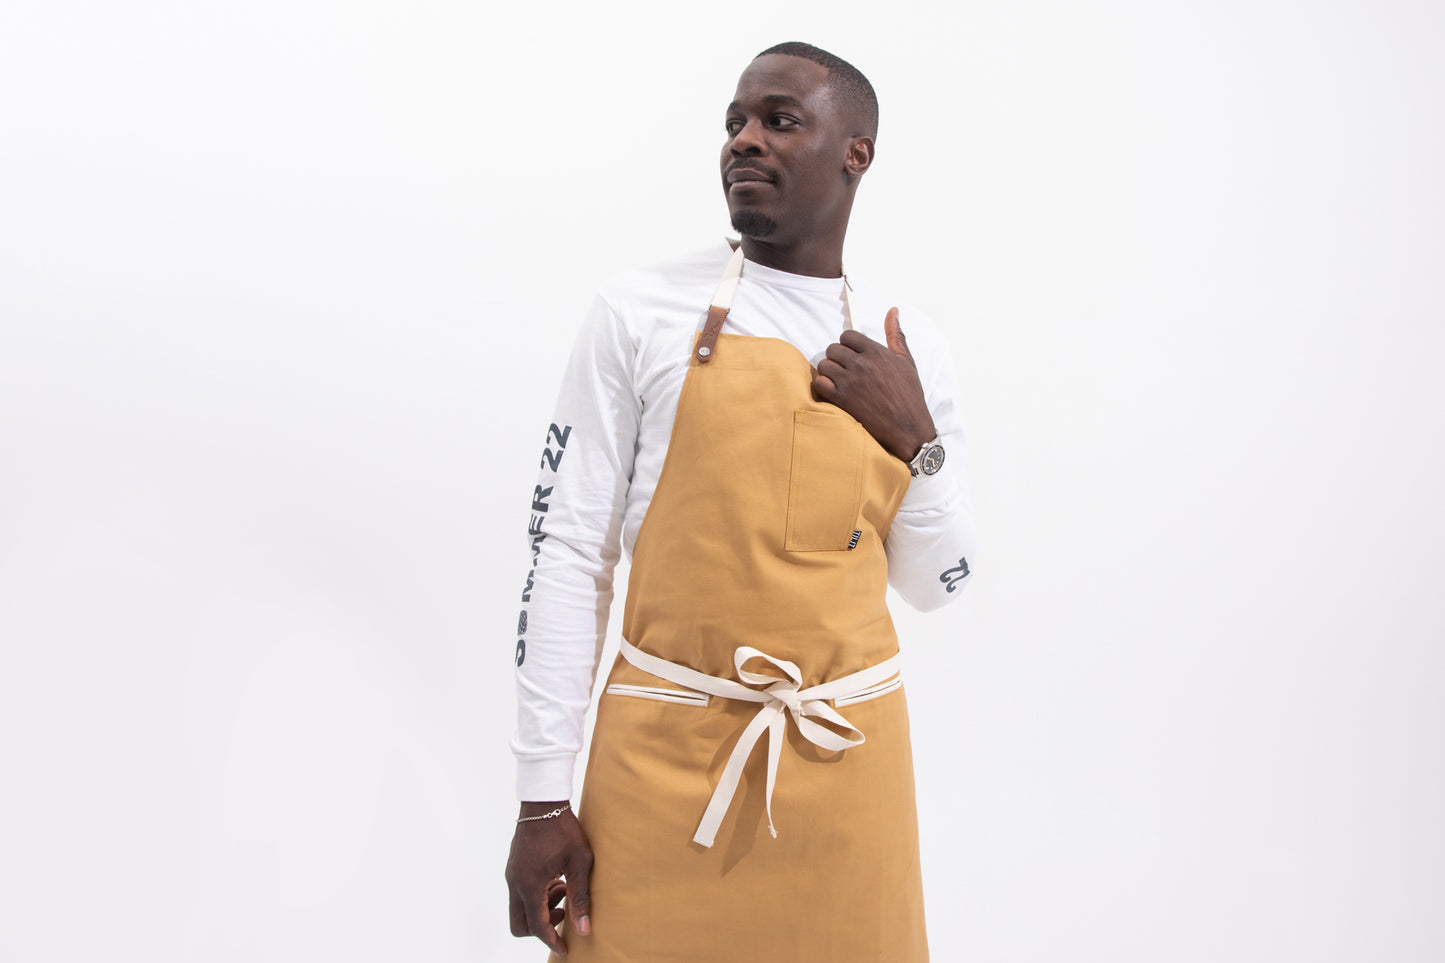 Why Do Chefs Wear Aprons?